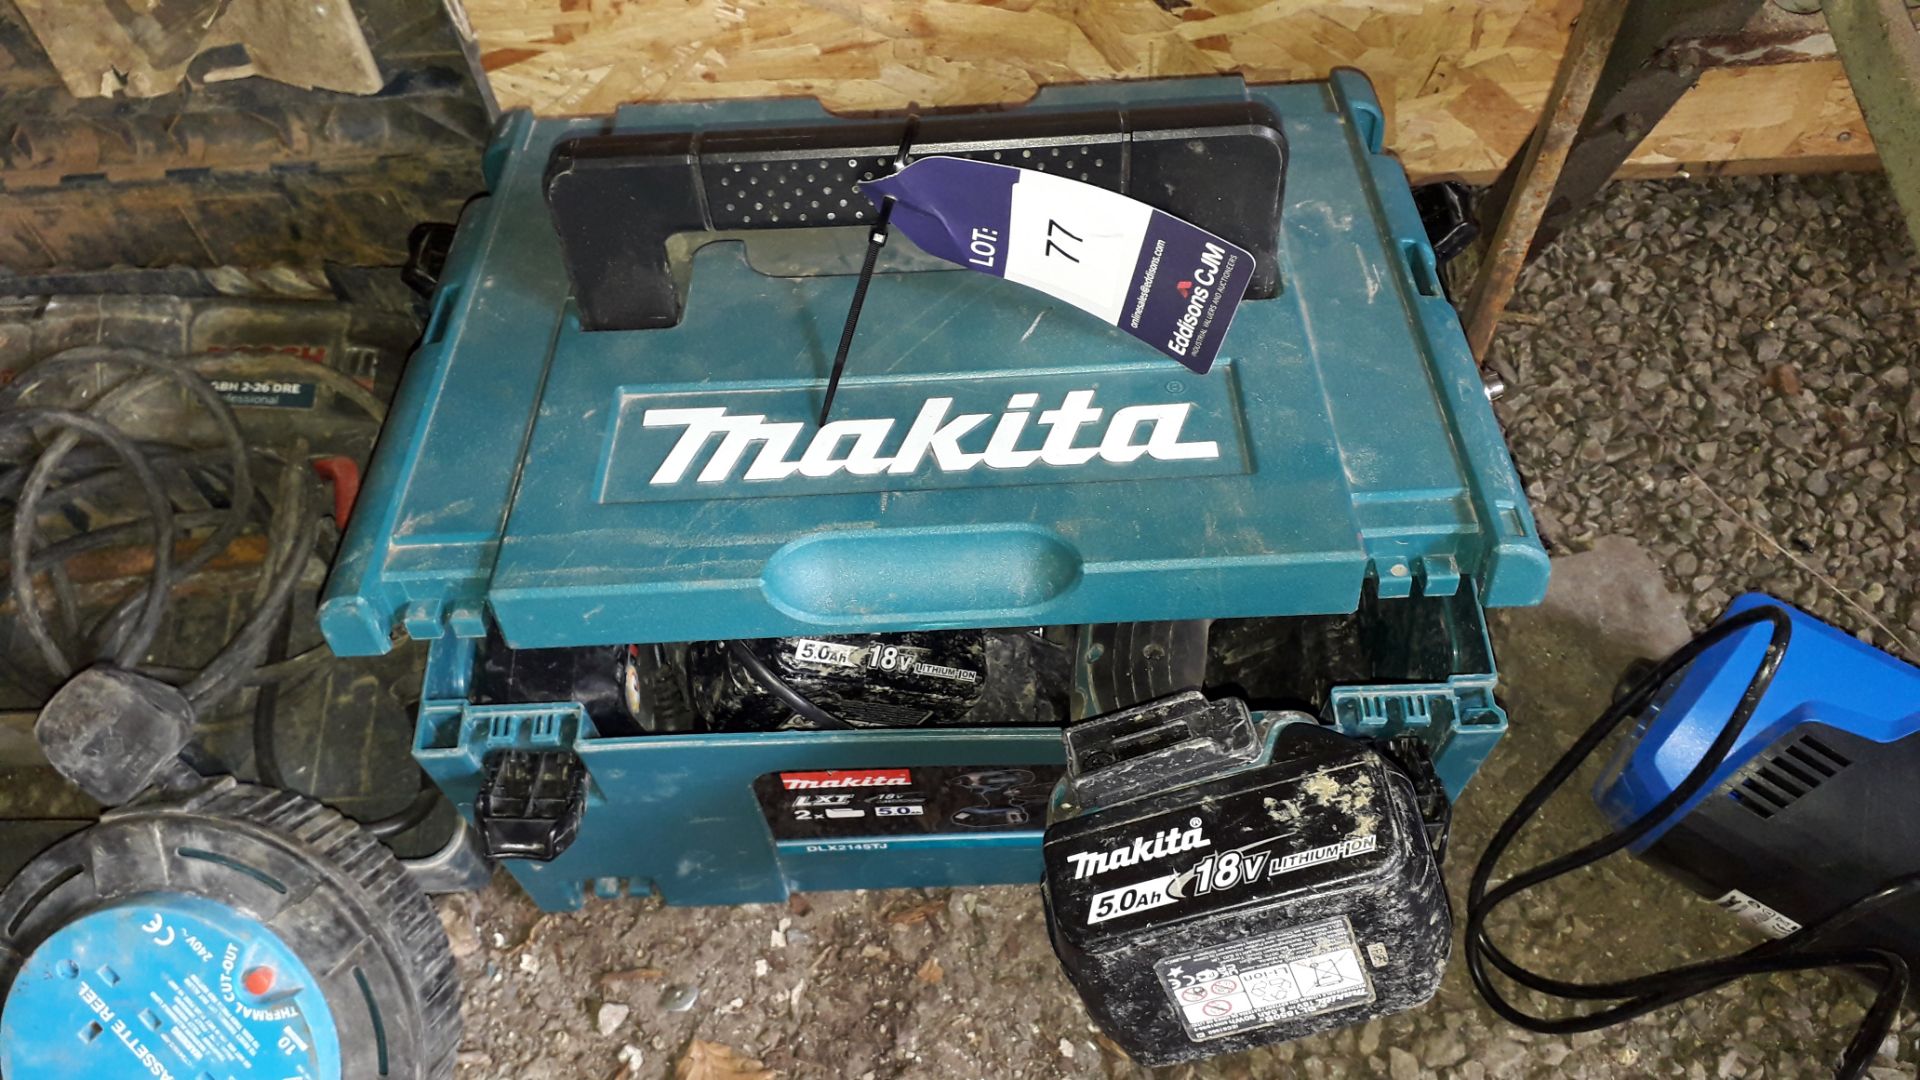 Makita Cordless Drill Set with DHP458 & DTD 152 Drills and Silverline Drill Sharpener - Image 2 of 2